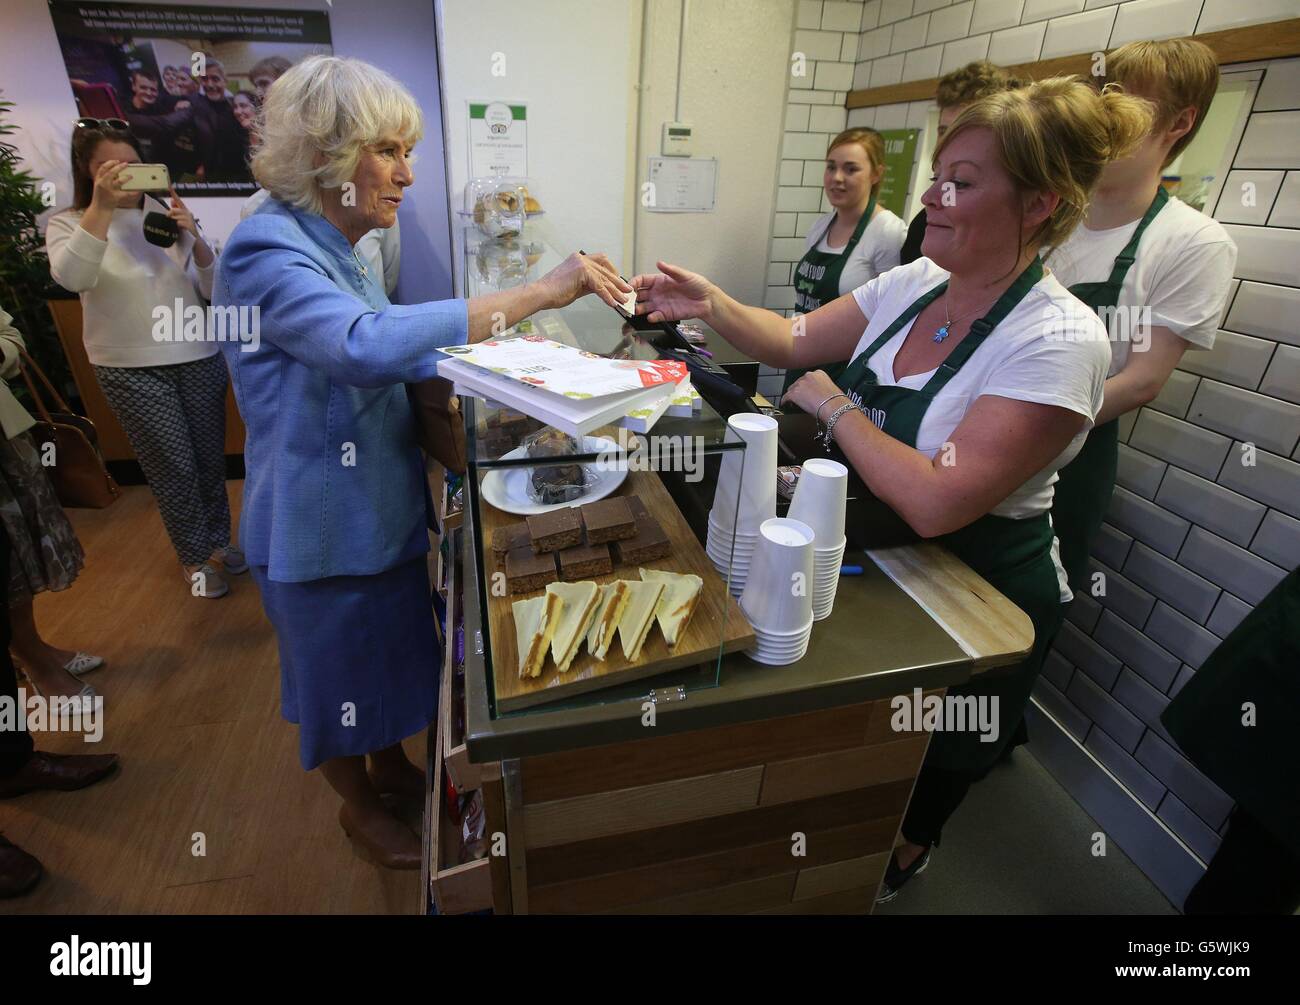 The Duchess of Cornwall, known as the Duchess of Rothesay while in Scotland, speaks to Bonnie Burton (right) as she donates money, during a visit to Social Bite, a cafe in Edinburgh which feeds, trains and employs members of the homeless community. Stock Photo